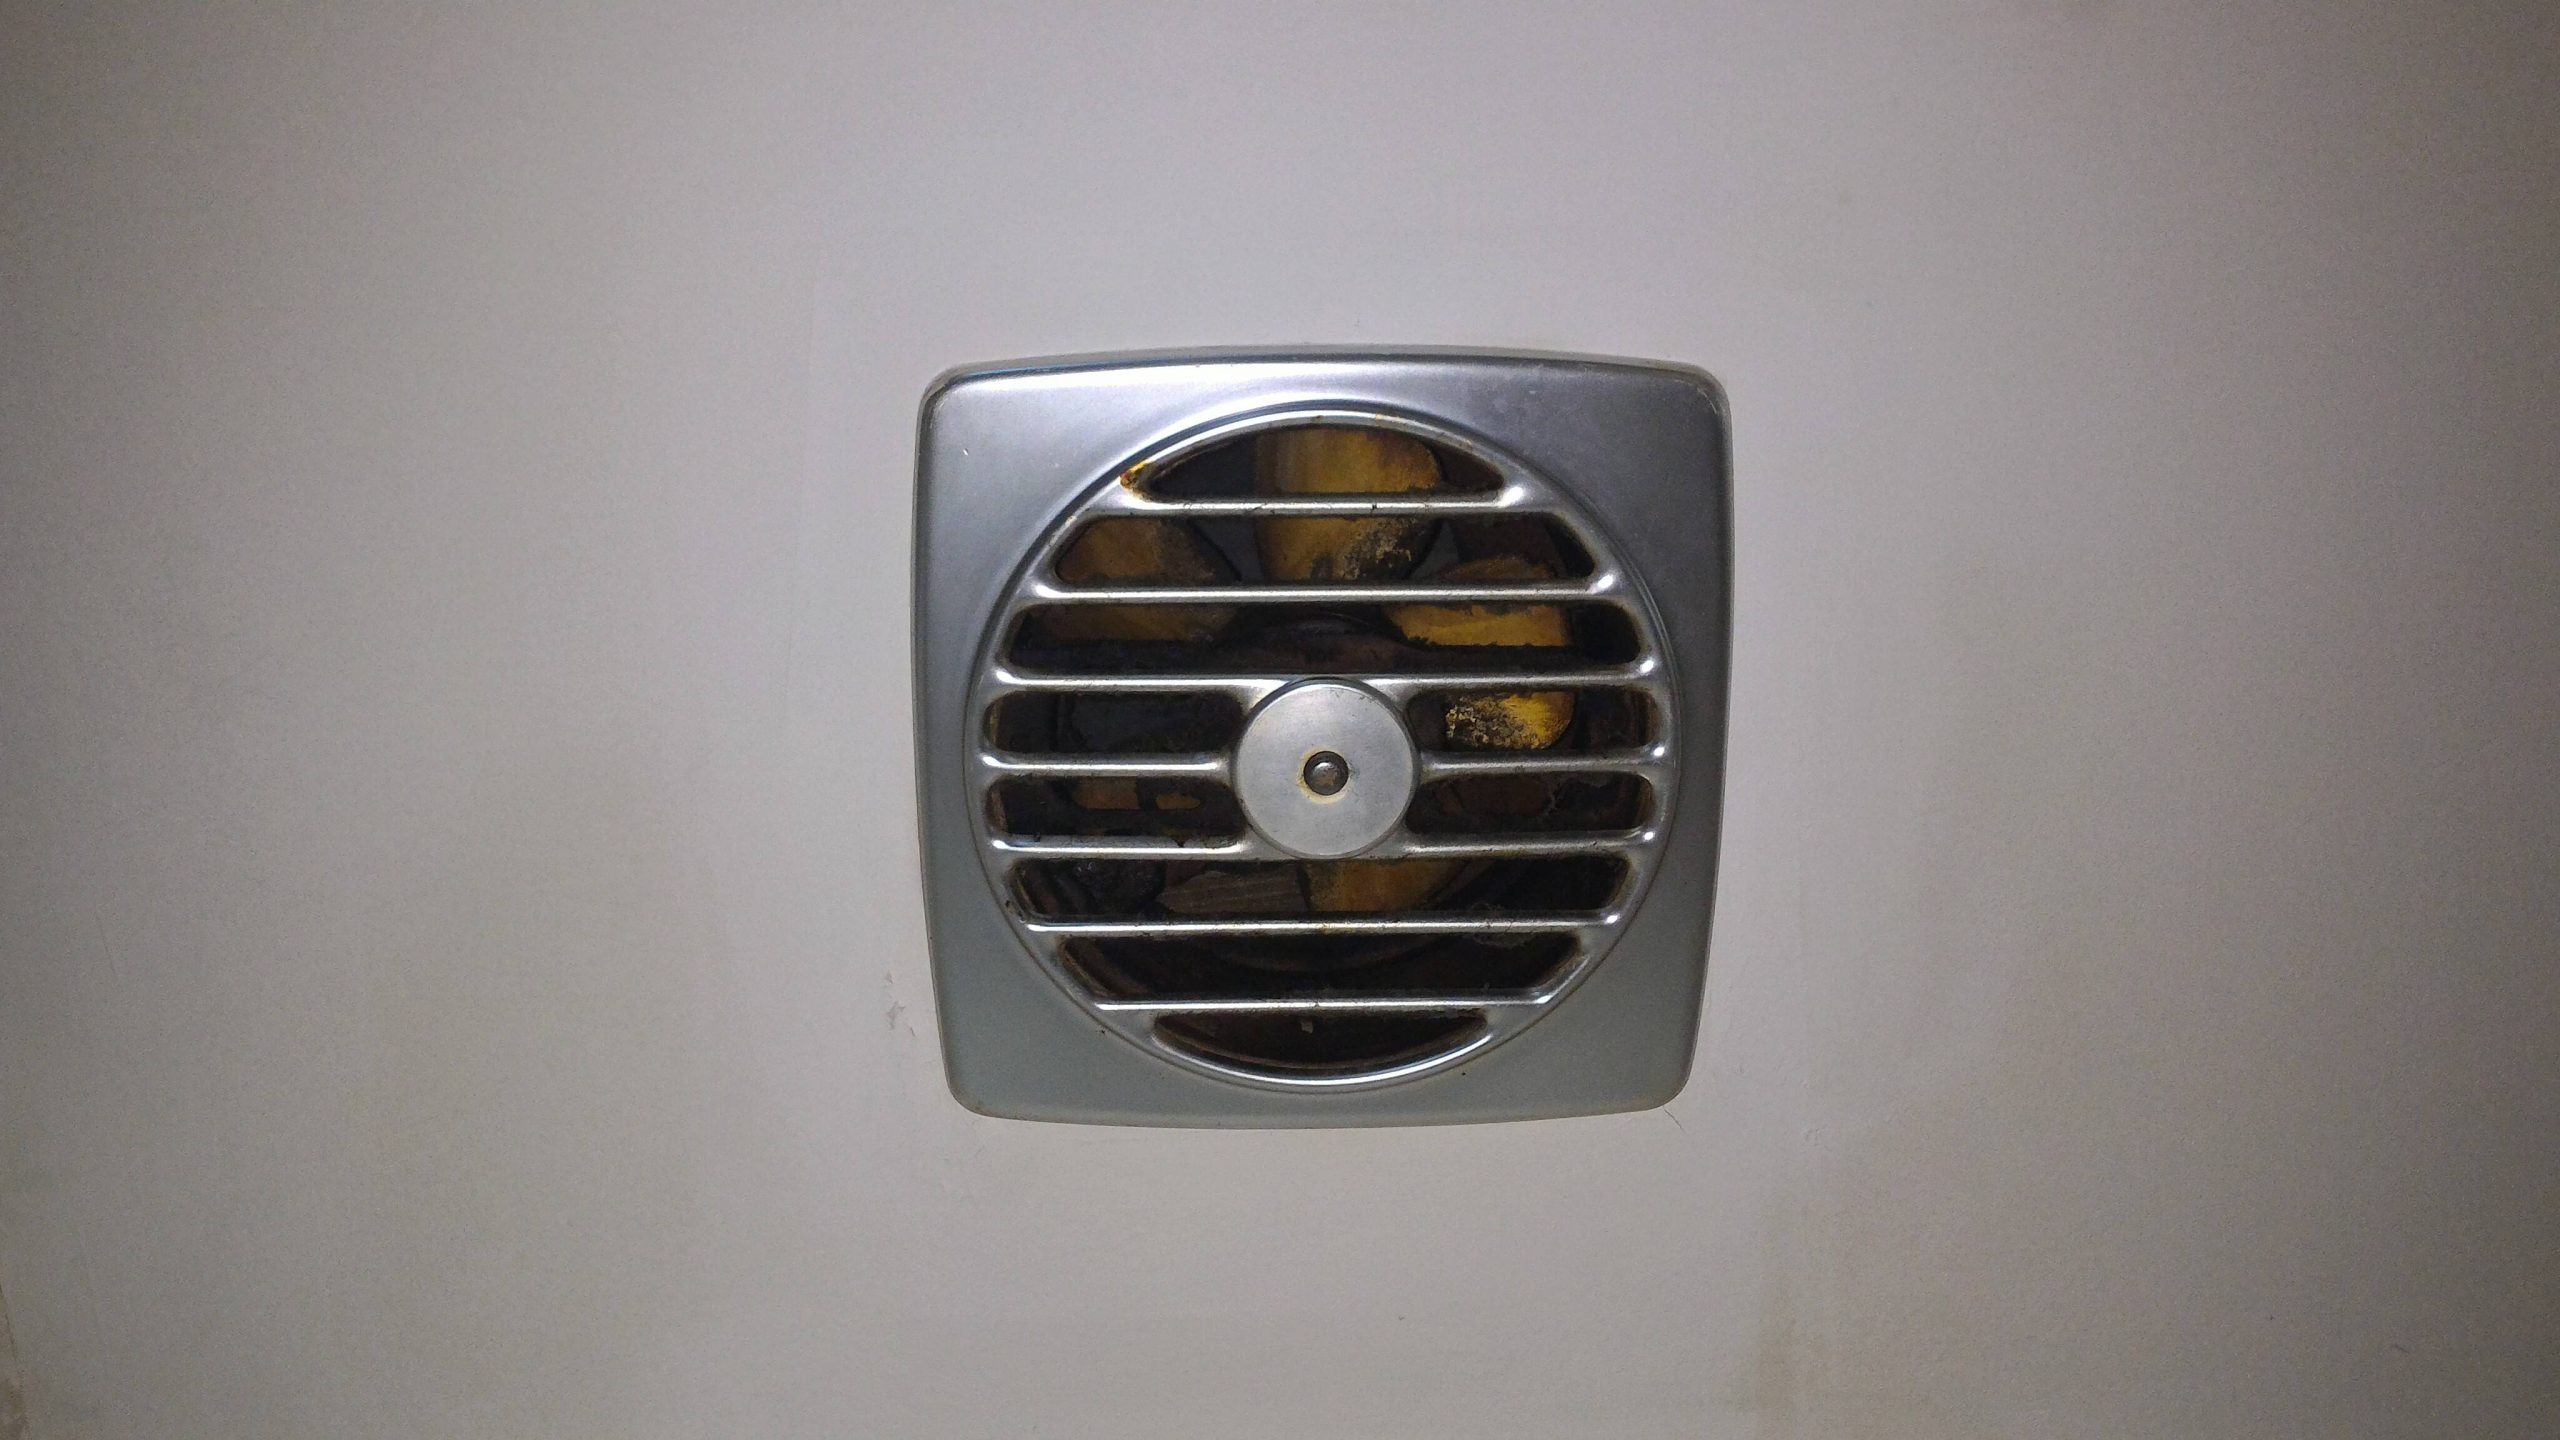 Ceiling Exhaust Fan In Kitchen Home Improvement Stack Exchange for measurements 4096 X 2304